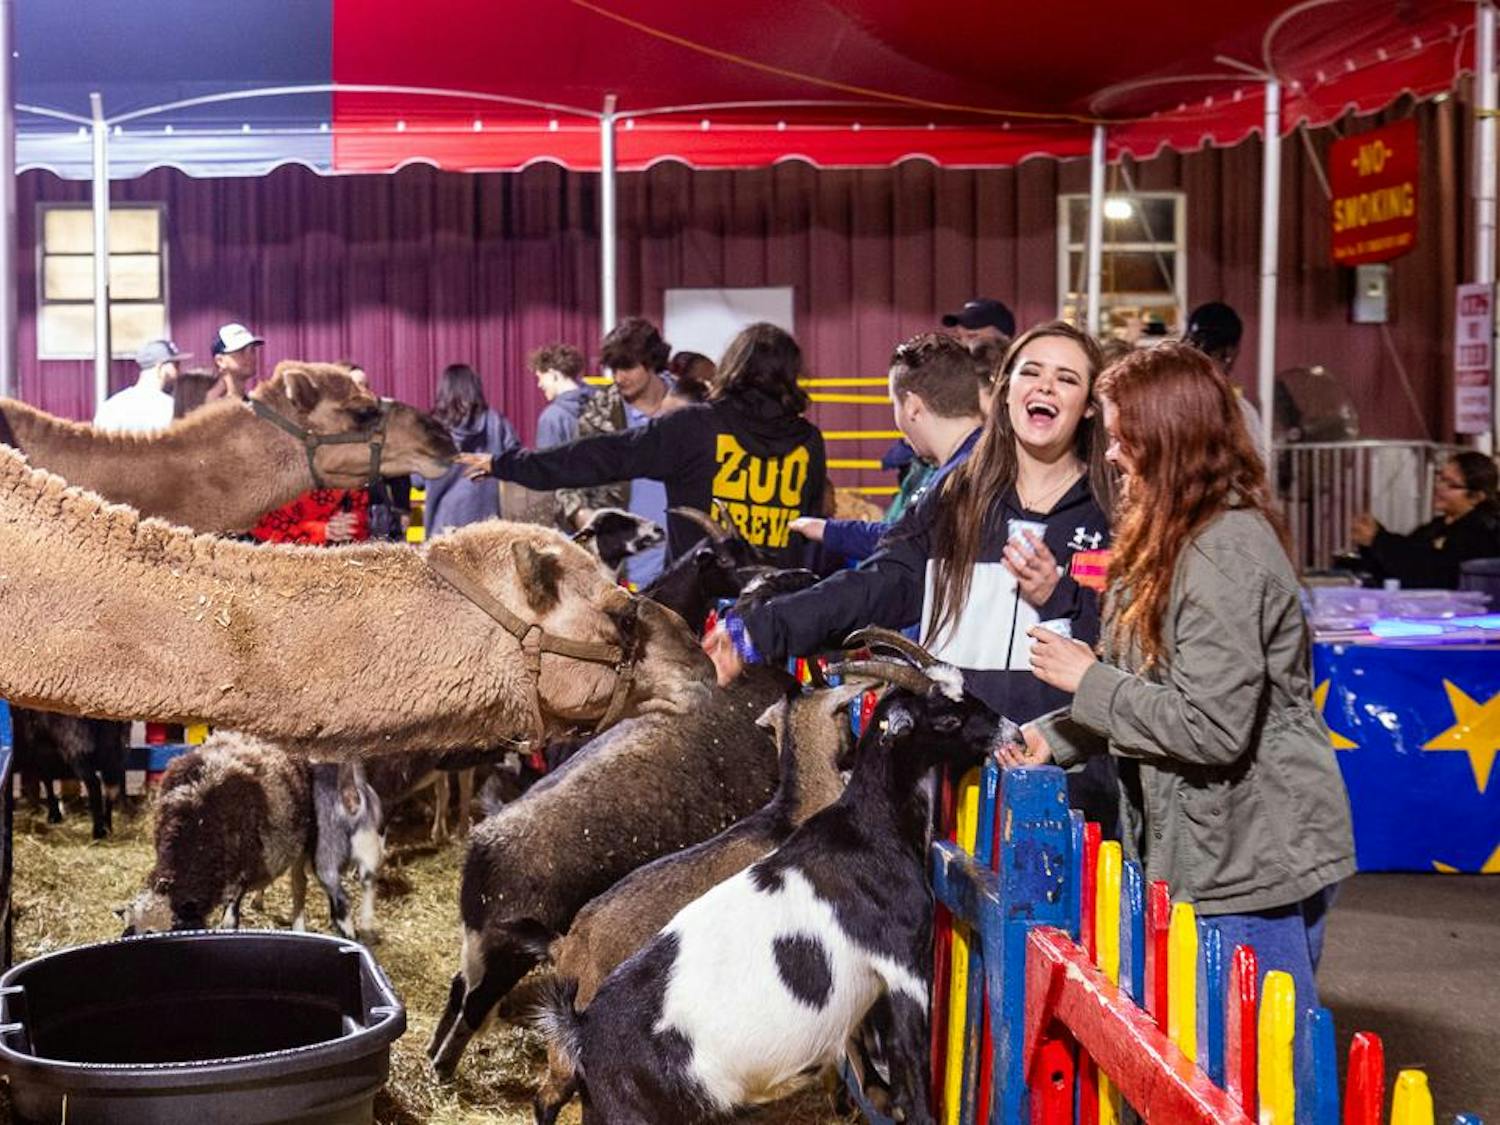 Columbia residents Lyndsey (left) and Courtney (right) Lyman laugh while feeding a camel and goat at the petting zoo of the South Carolina State Fair on Oct. 18, 2023. The petting zoo features camels, goats, sheep, zebu cattle and donkeys for fairgoers to feed and interact with.